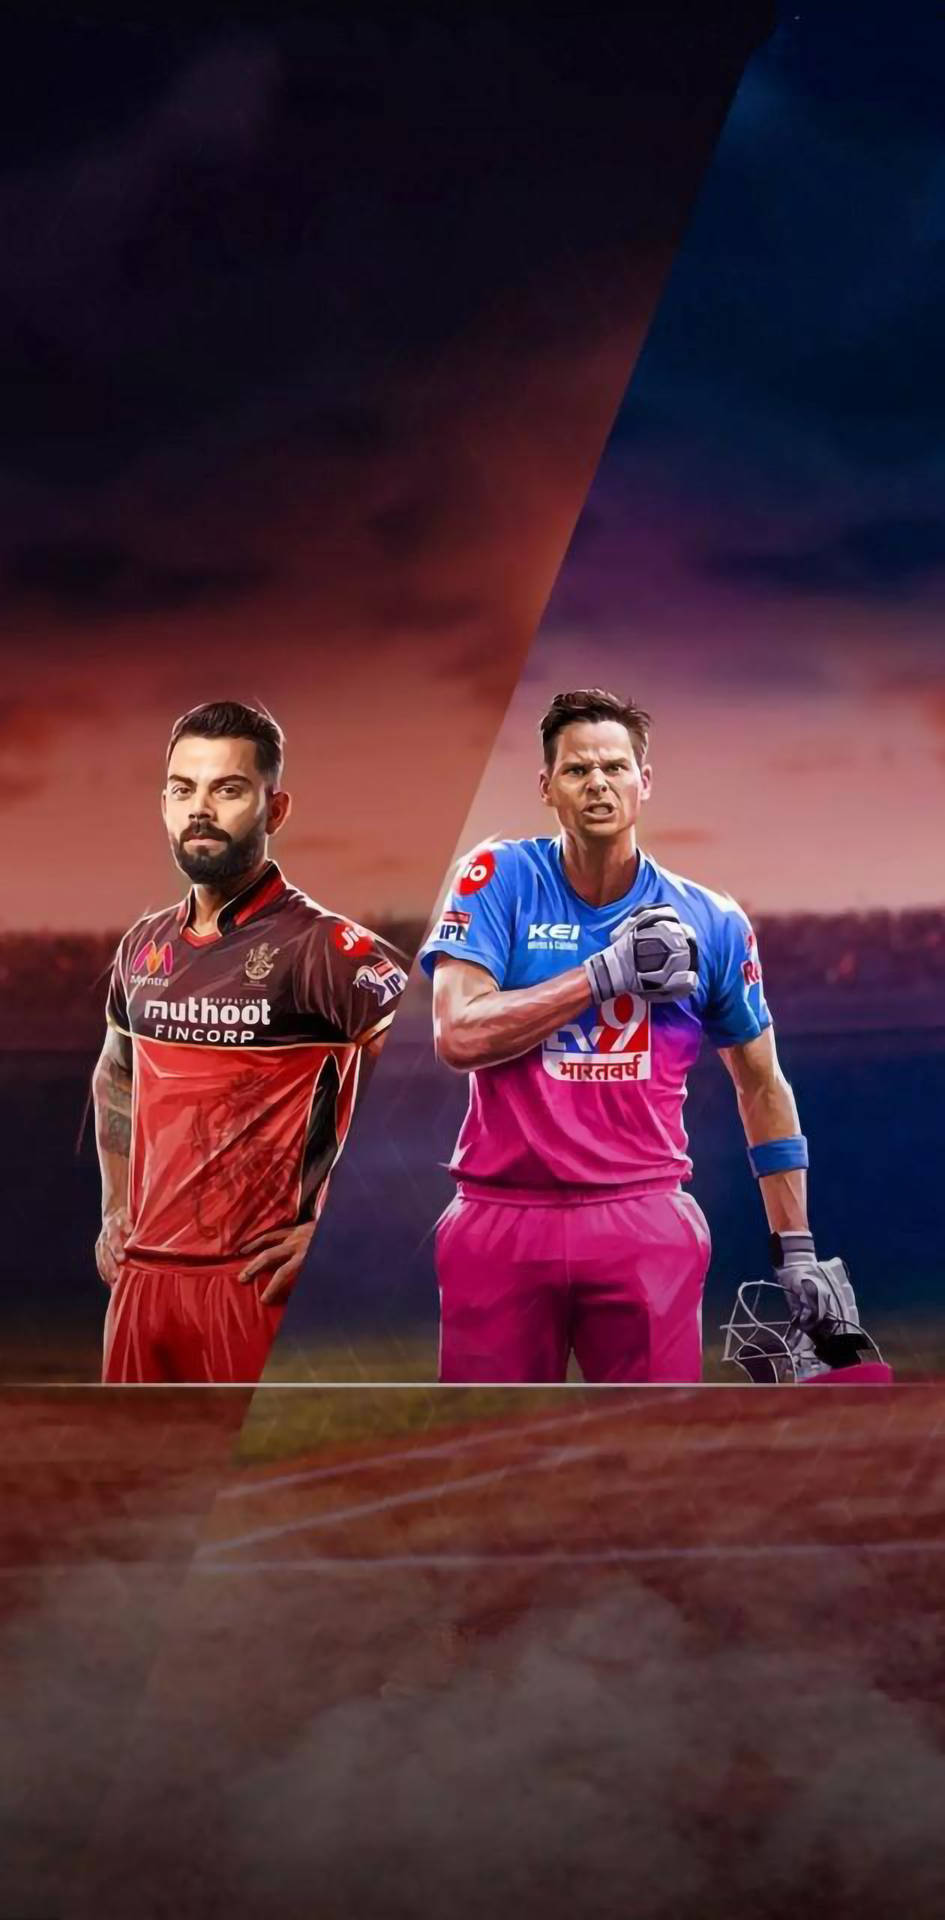 Rajasthan Royals And Royal Challengers Bangalore Background